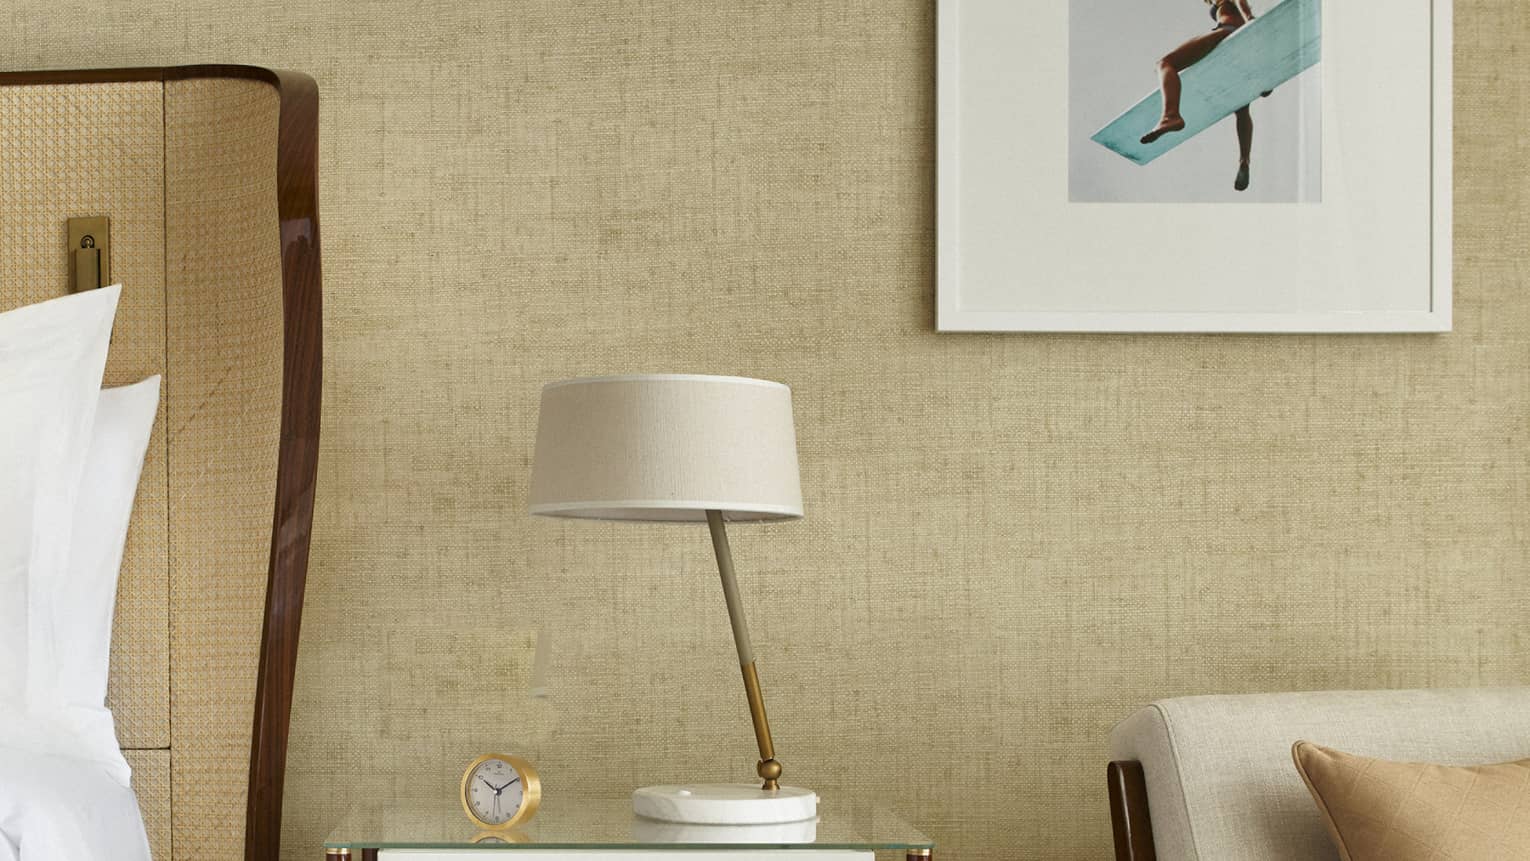 Next to a bed sits a nightstand with lamp, arm chair, square framed artwork on wall